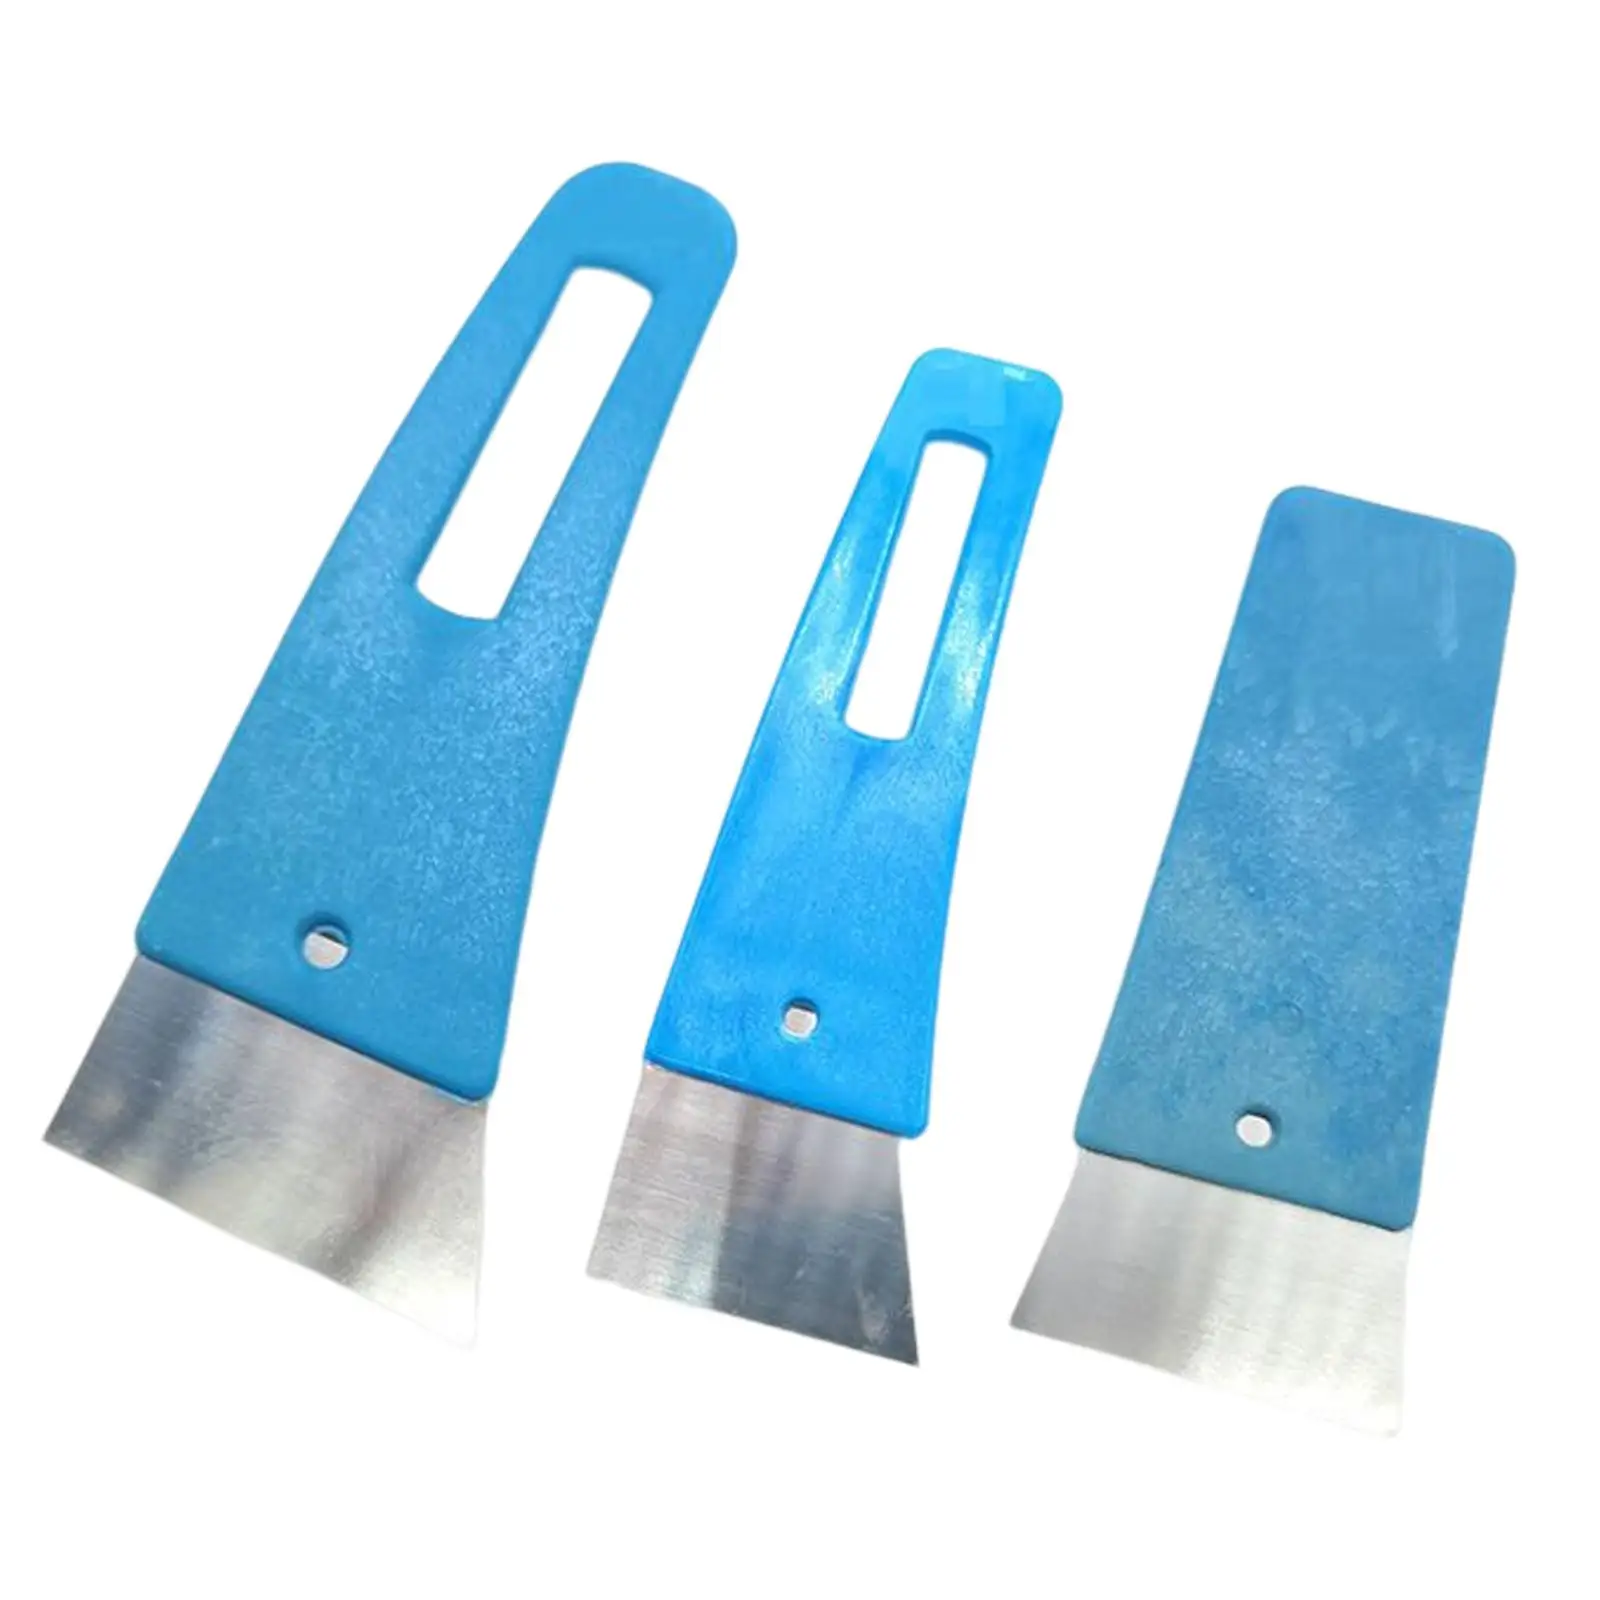 3 Pieces Car Window Film Scraper Squeegee Set Long Handle Cleaning Accessories for Wallpaper